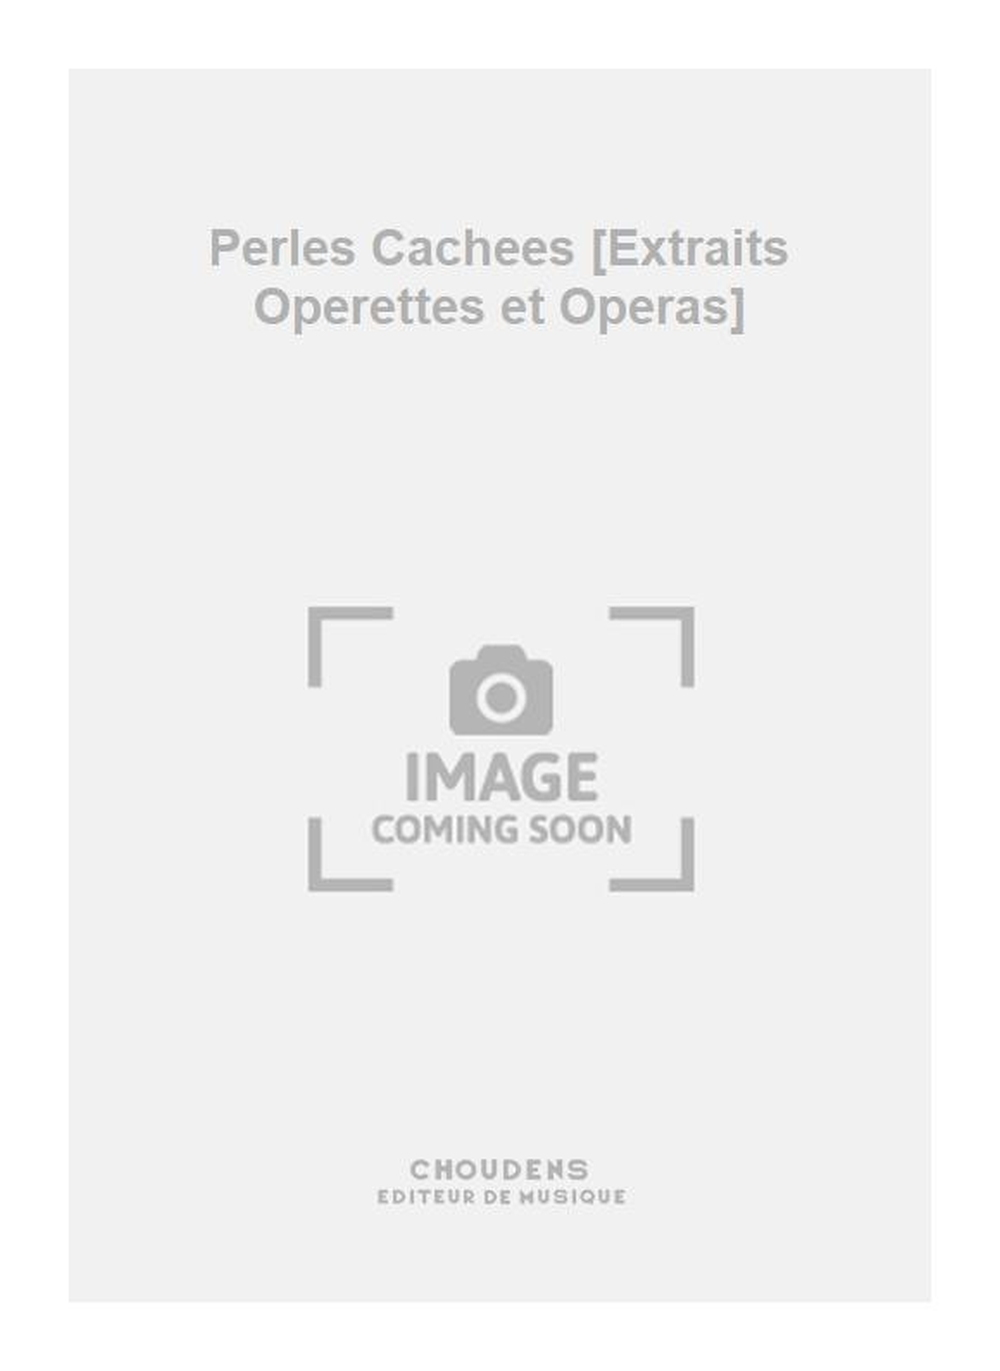 Messager: Perles Cachees [Extraits Operettes et Operas]